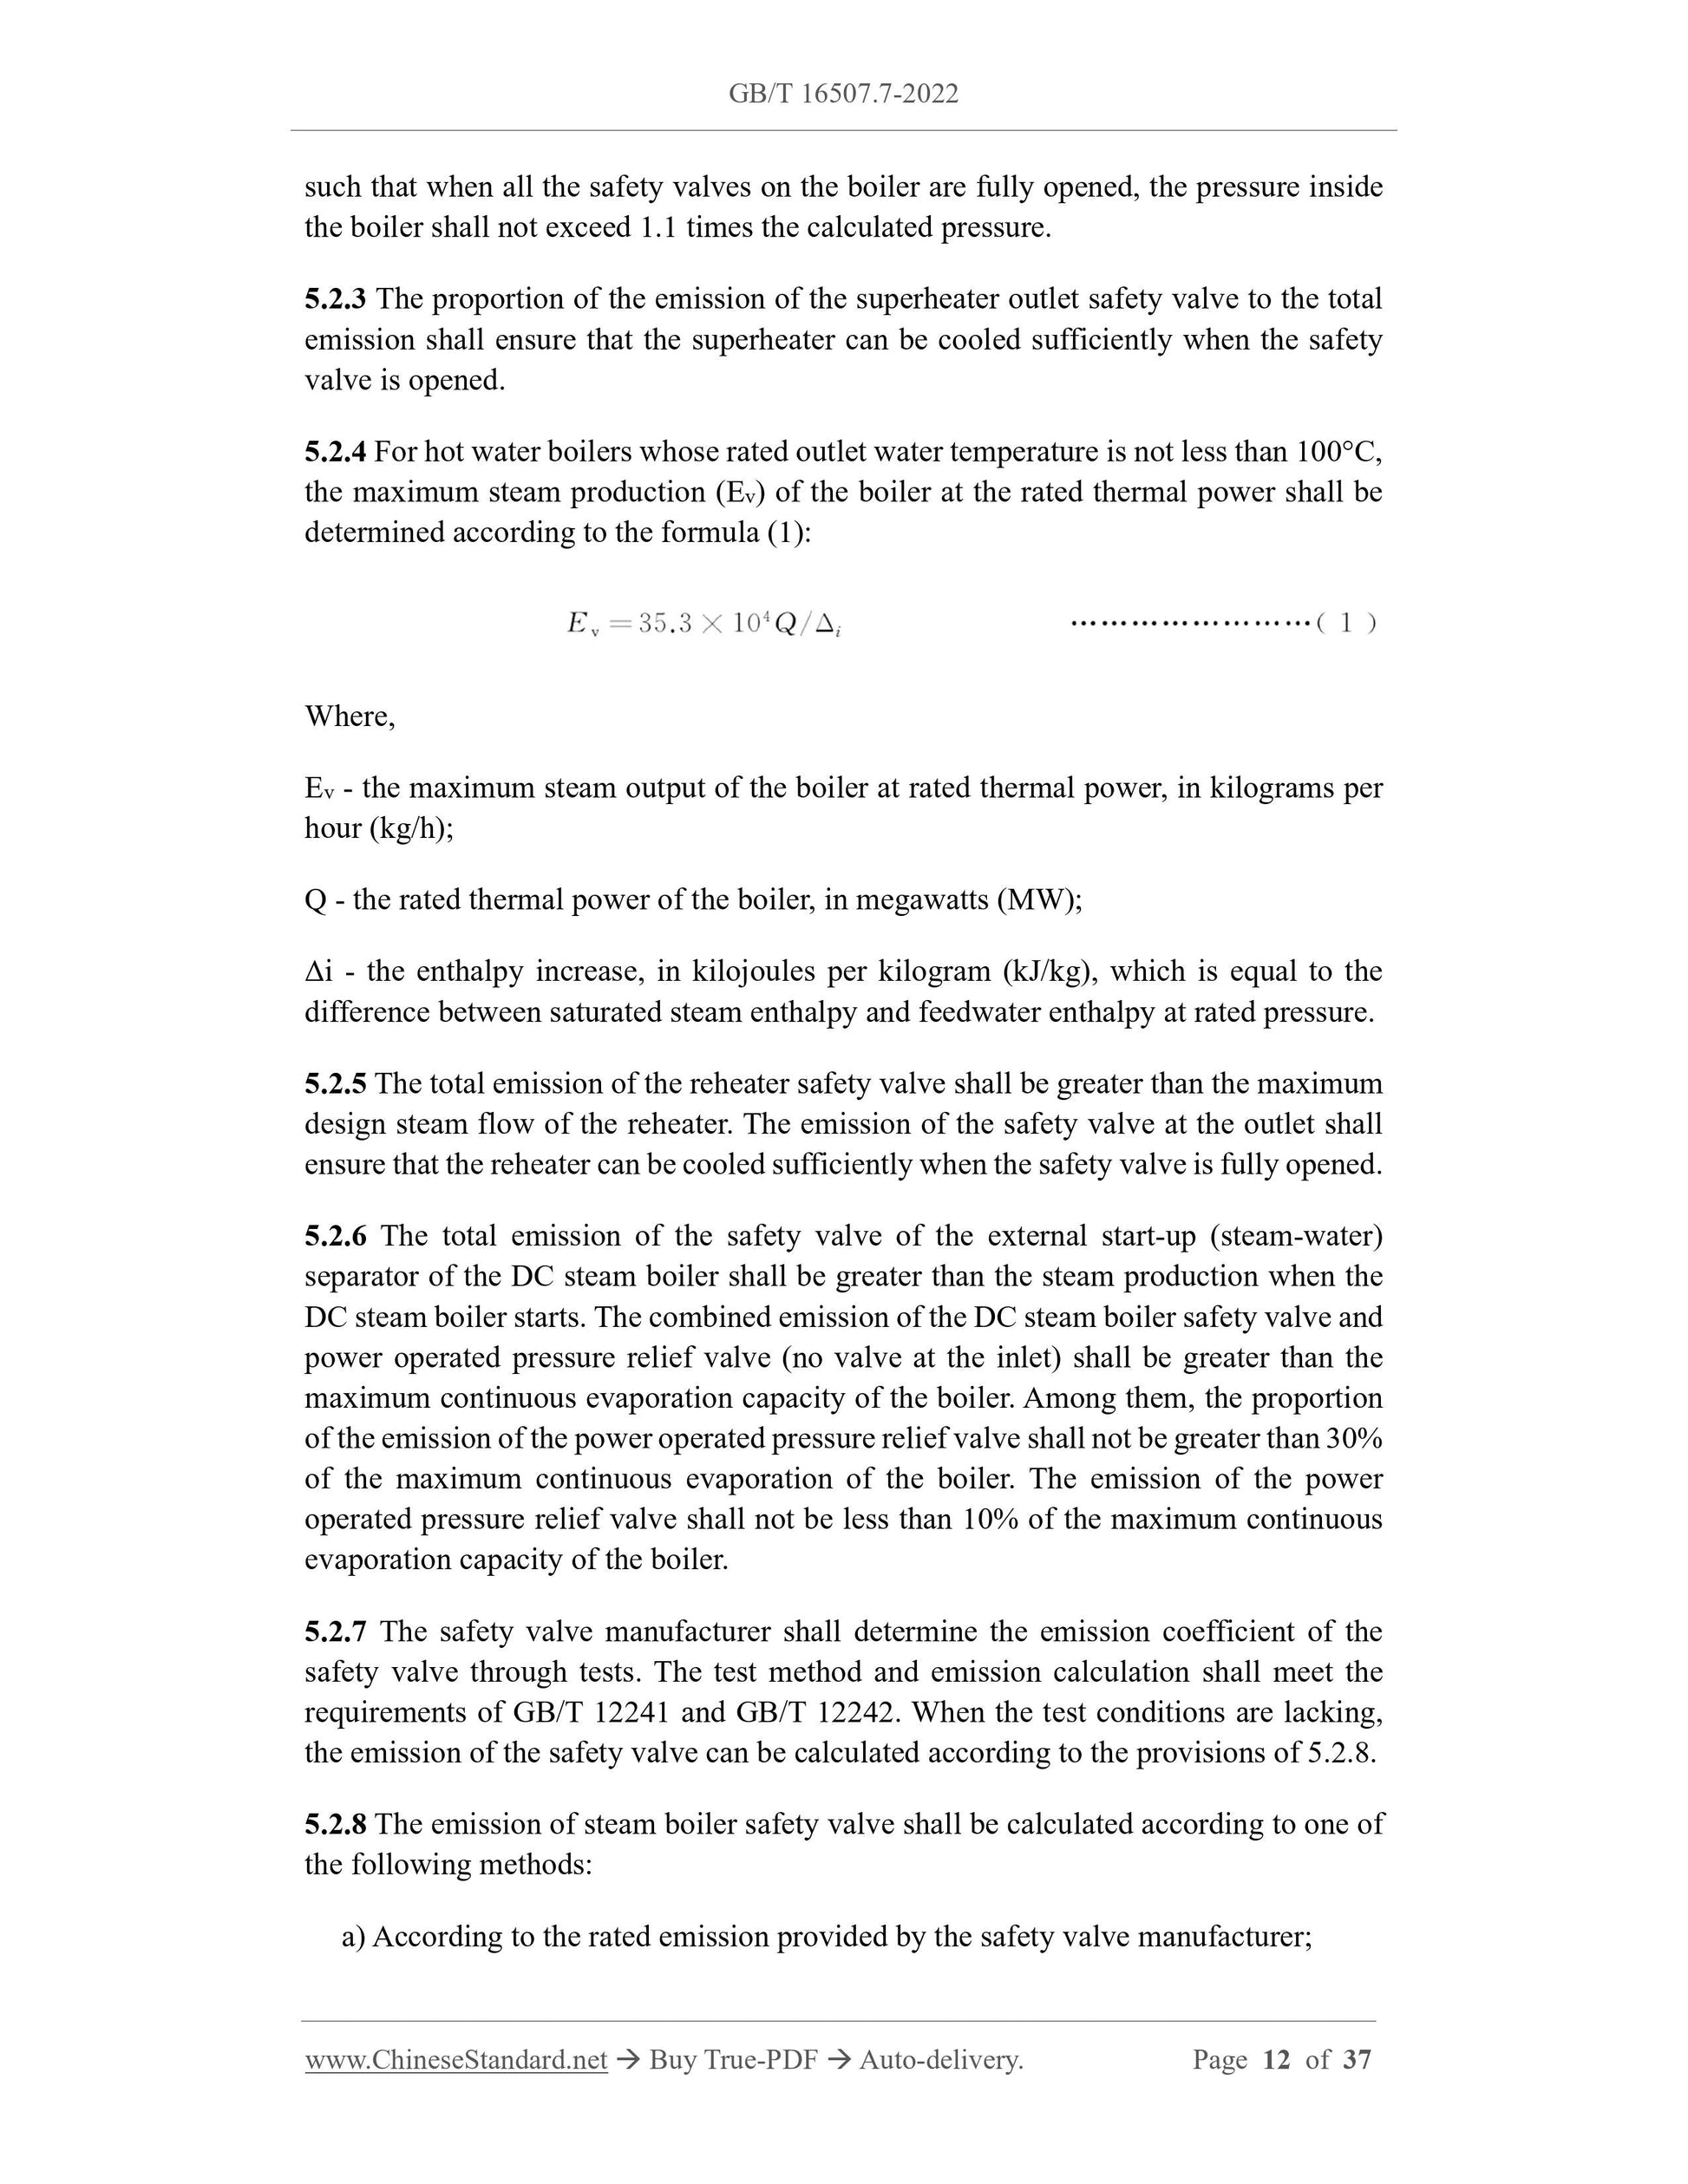 GB/T 16507.7-2022 Page 6